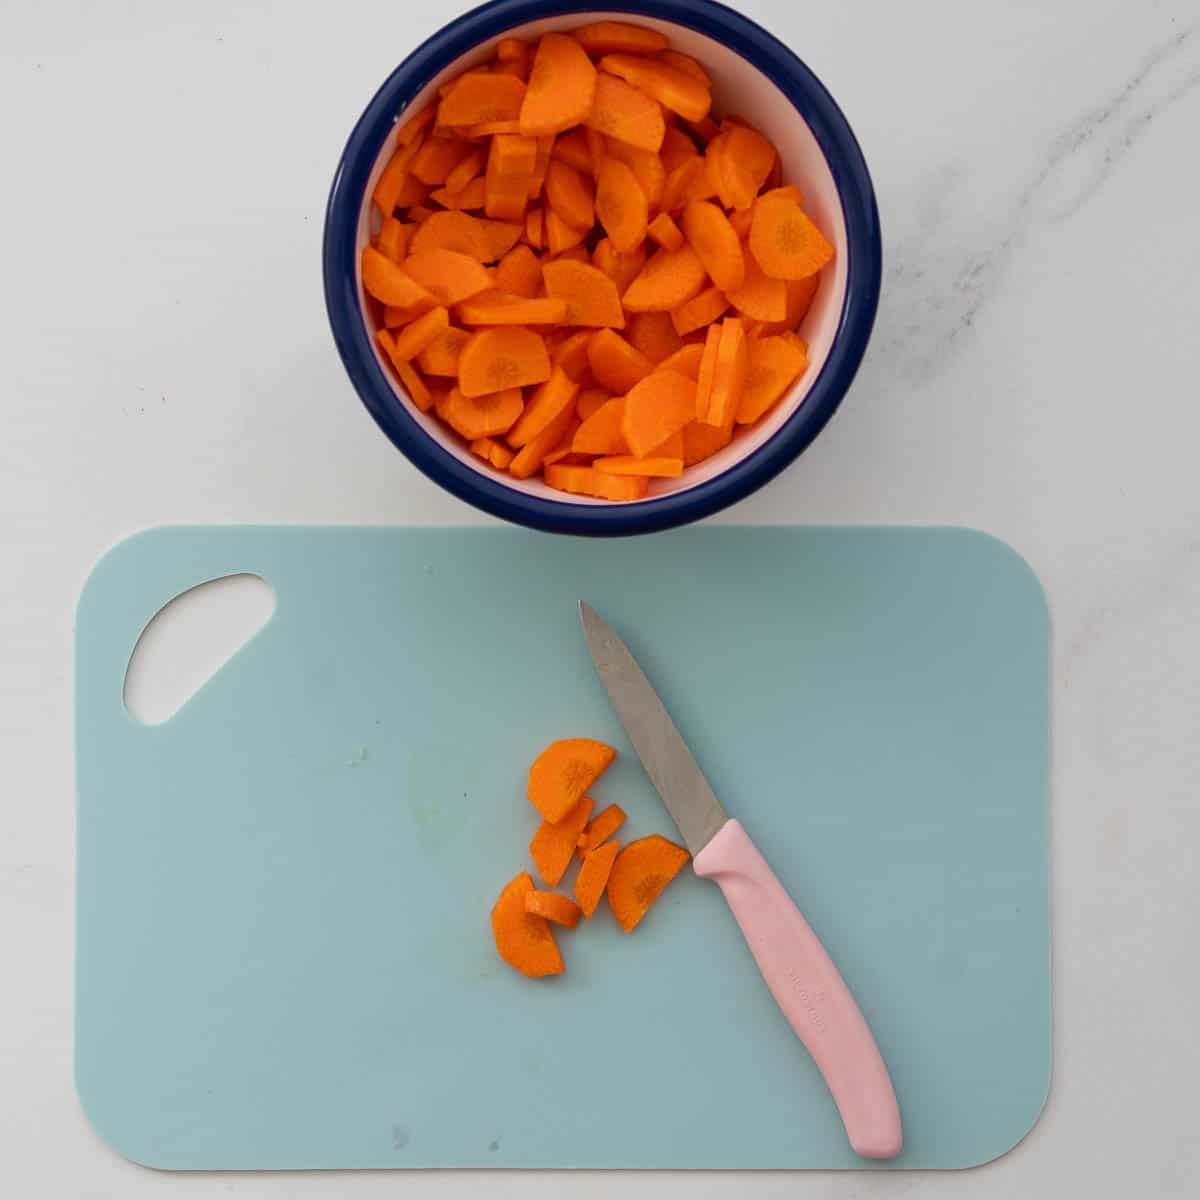 A white enamel bowl filled with slices of carrot next to a light blue chopping board and pink handled paring knife.